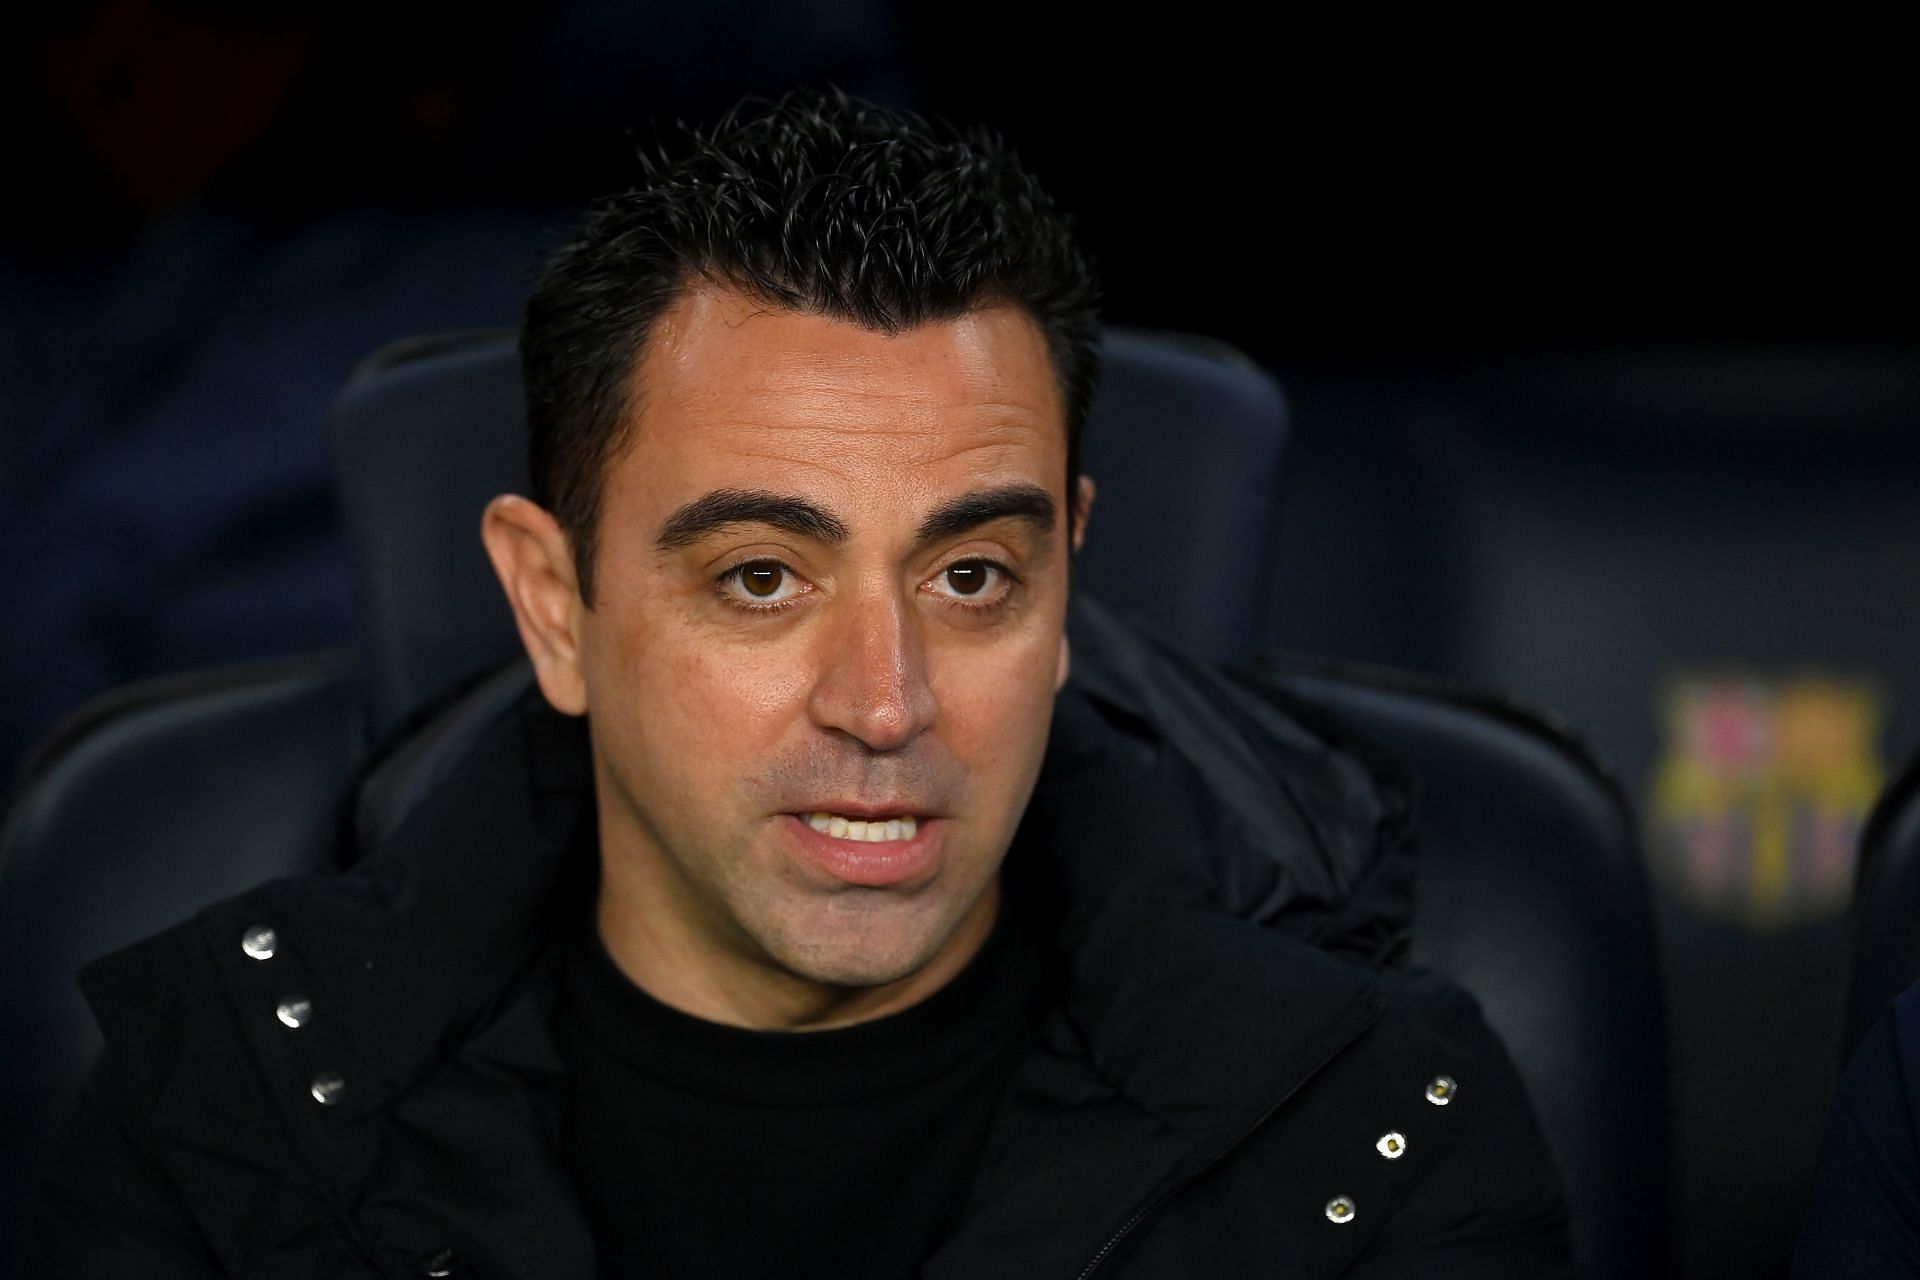 Xavi guided Barca to a second-place finish last season.